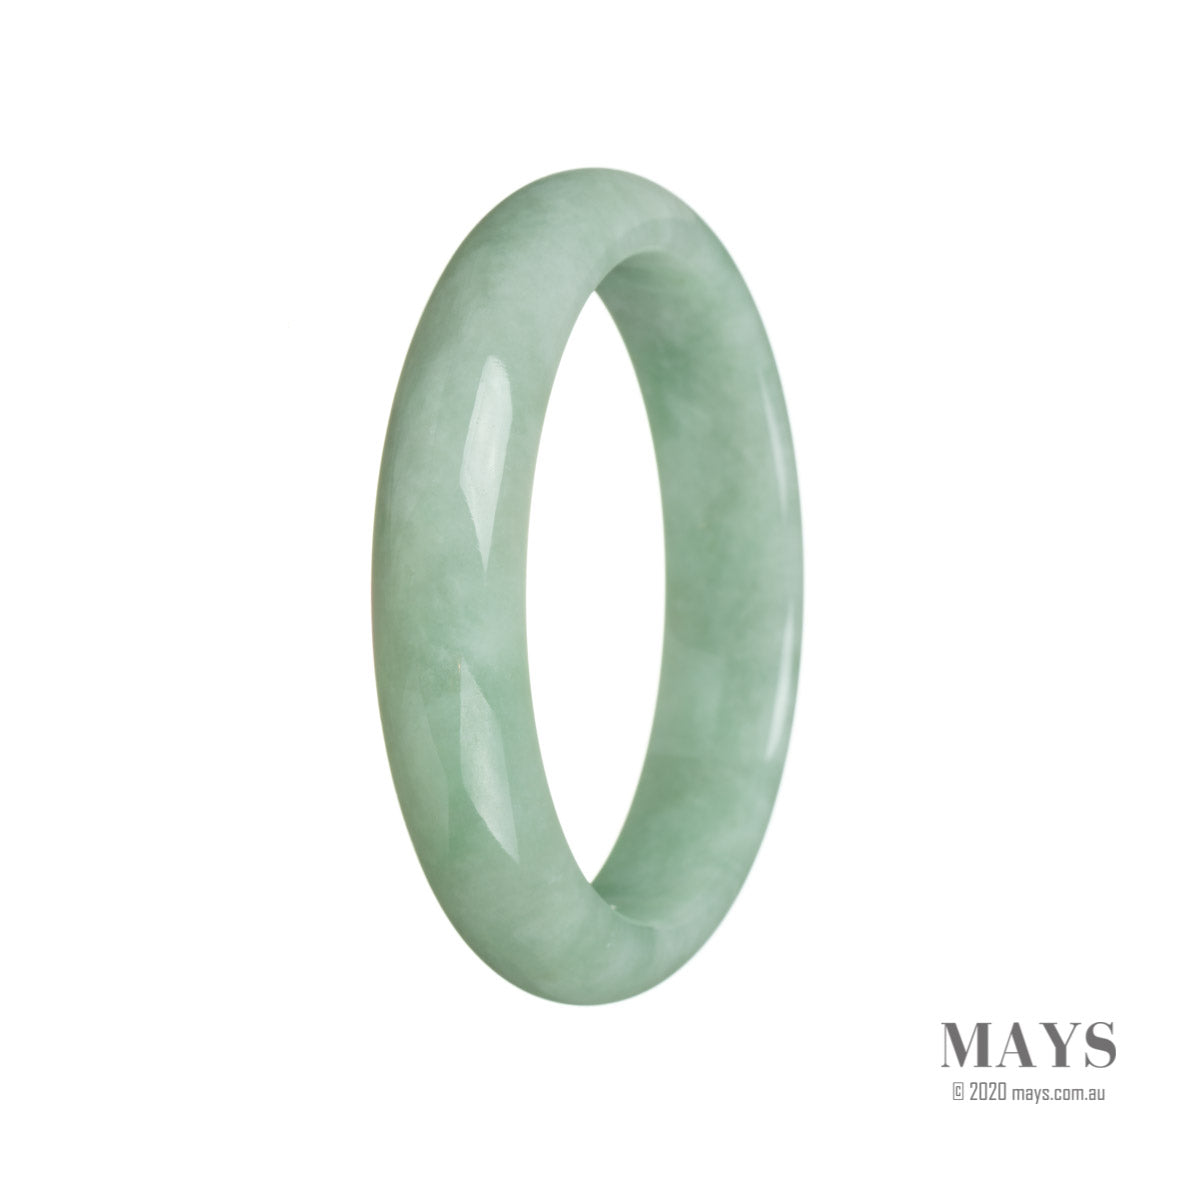 A light green traditional jade bangle with a half moon design, measuring 59mm. This genuine Type A jade piece is offered by MAYS GEMS.